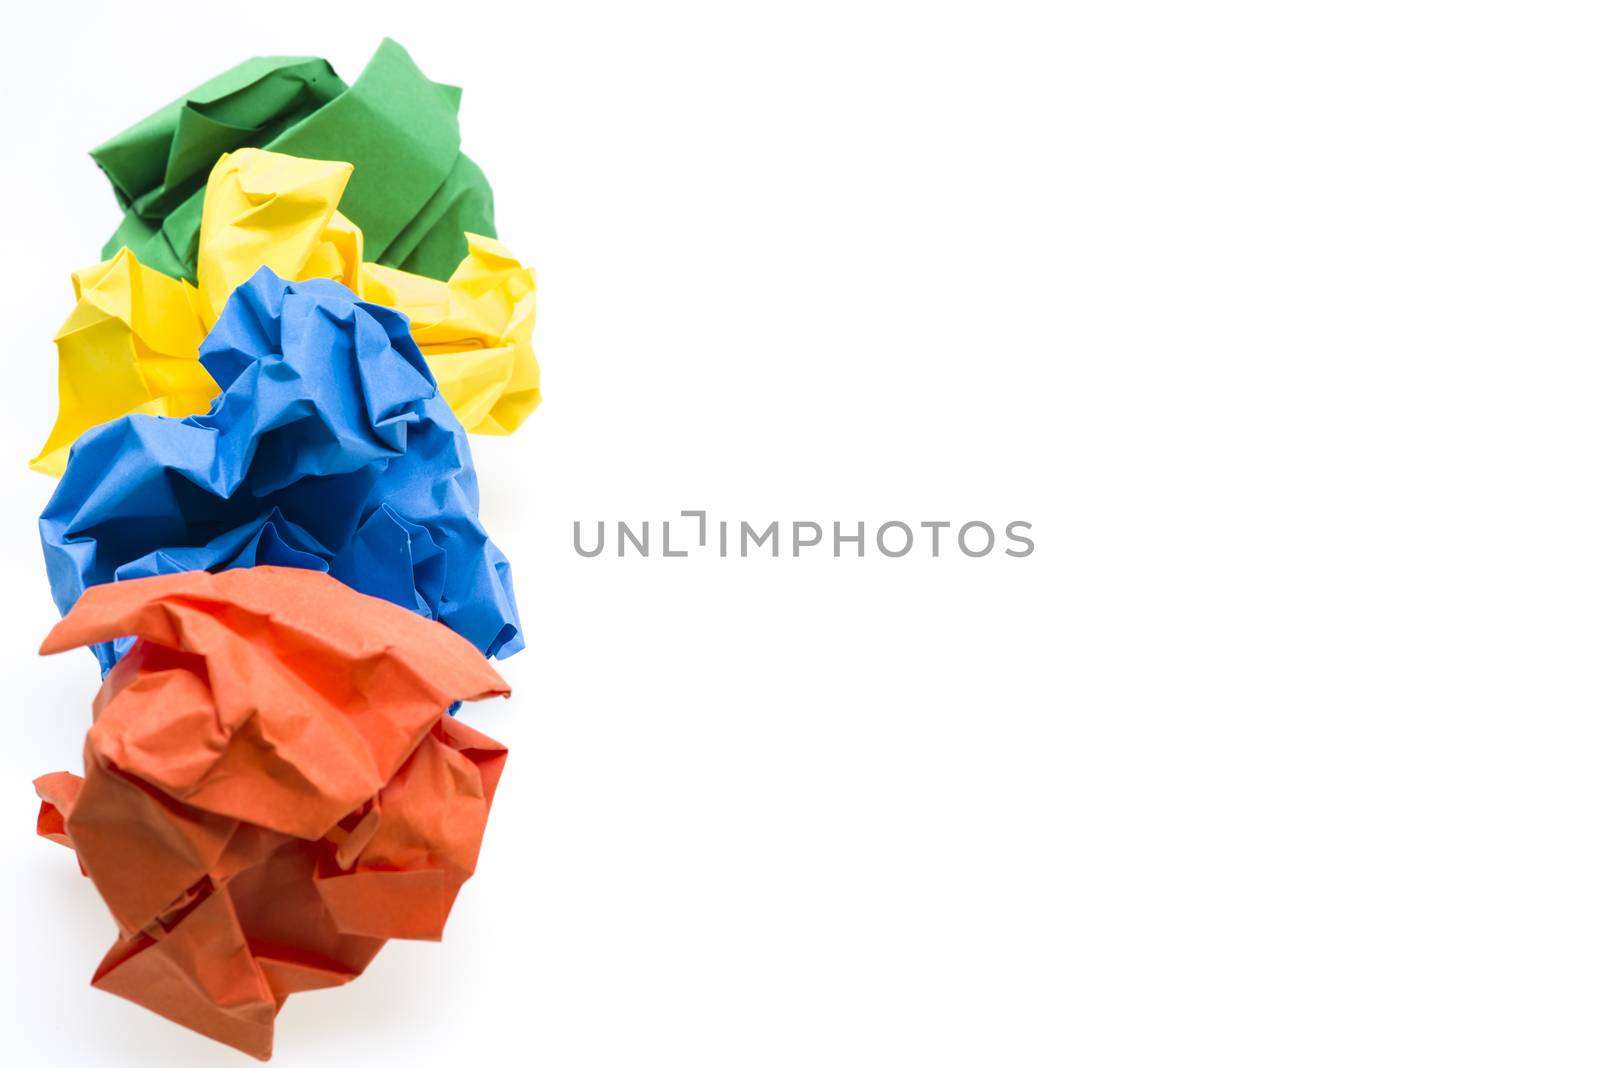 Colored crumpled paper ball in a row, focus on the blue one